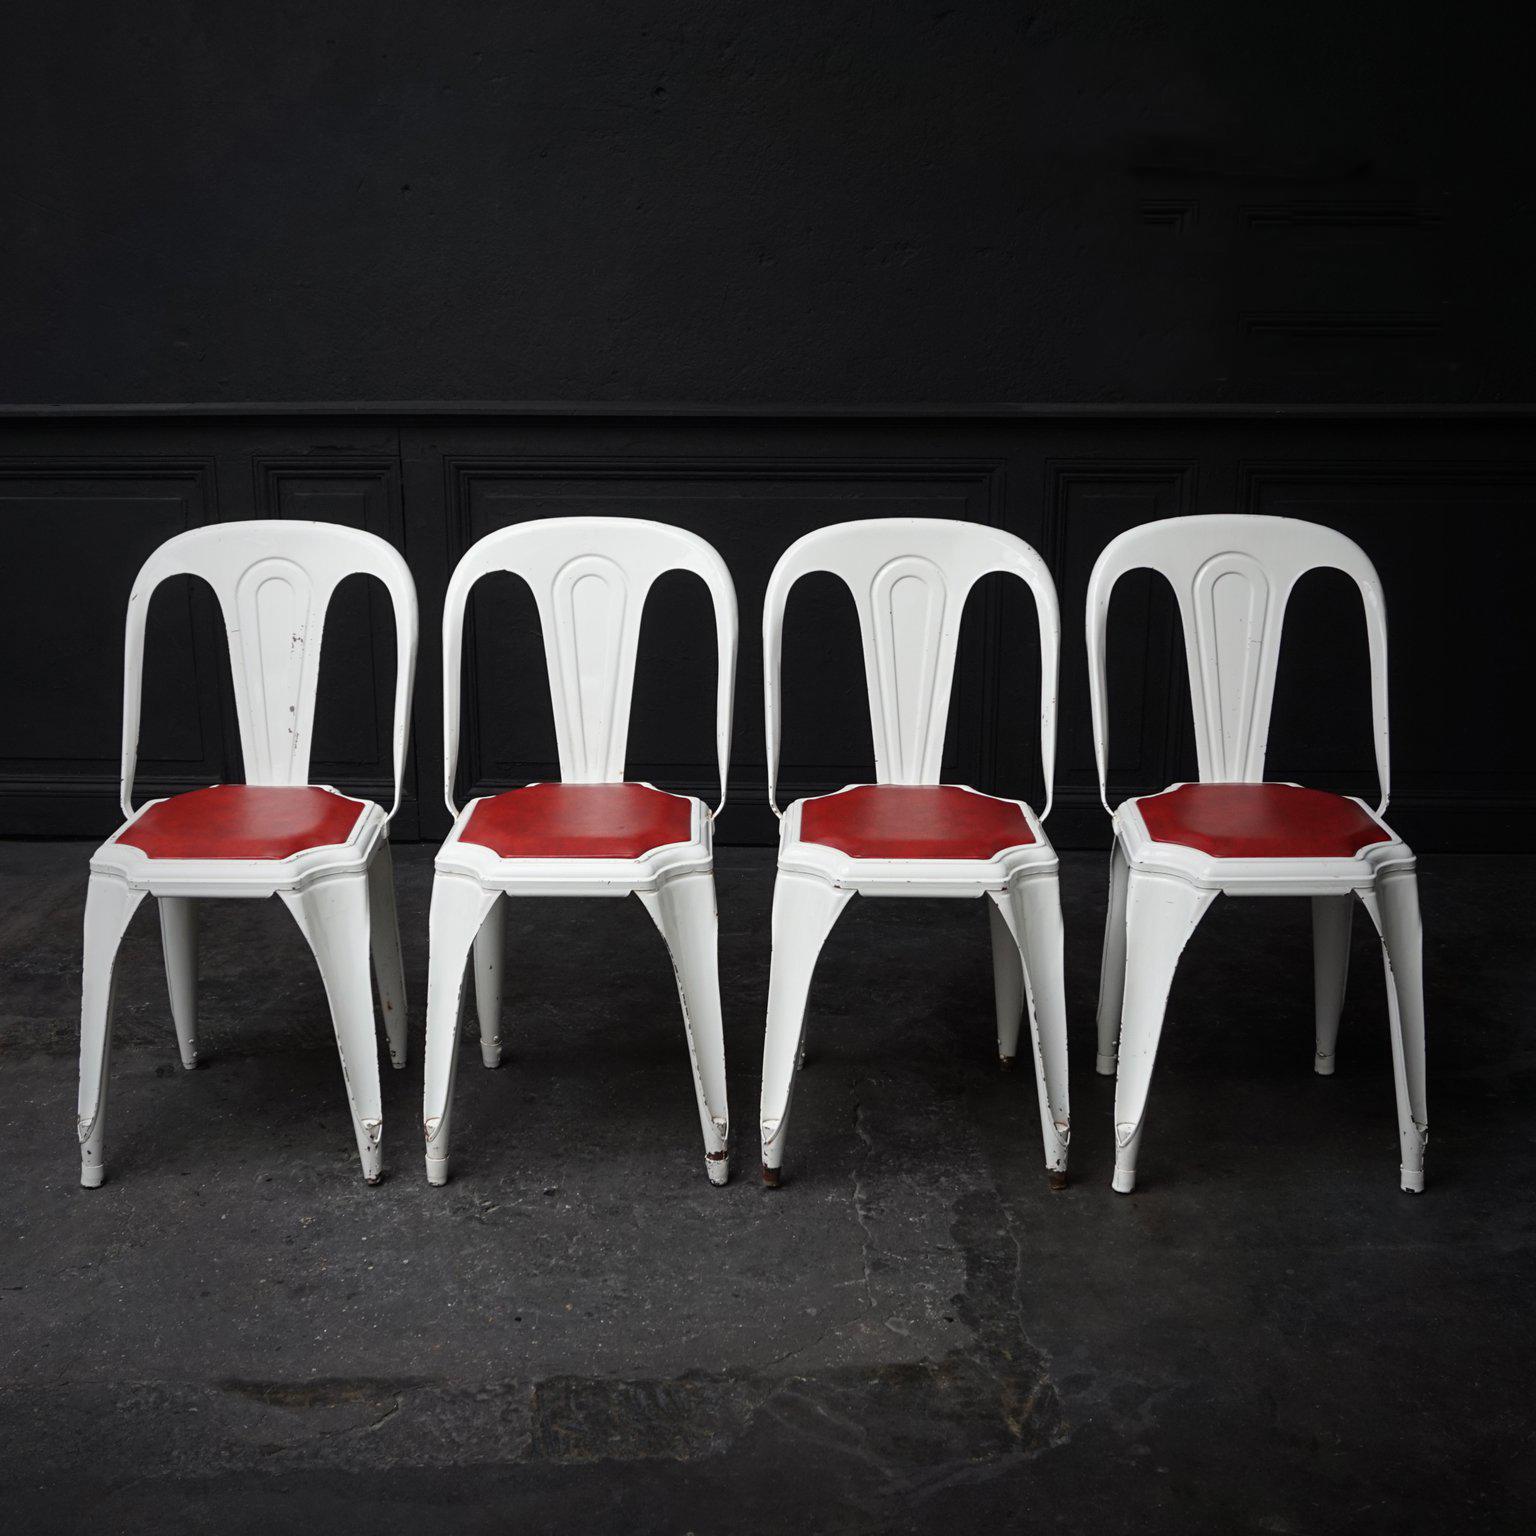 Rare 1950s Fibrocit Industrial steel structure chairs. One of the first stackable and stainless terrace chairs, also known as the Belgian Tolix.

Look how pretty this white-red Industrial stackable set of four metal bistro chairs is. They are in